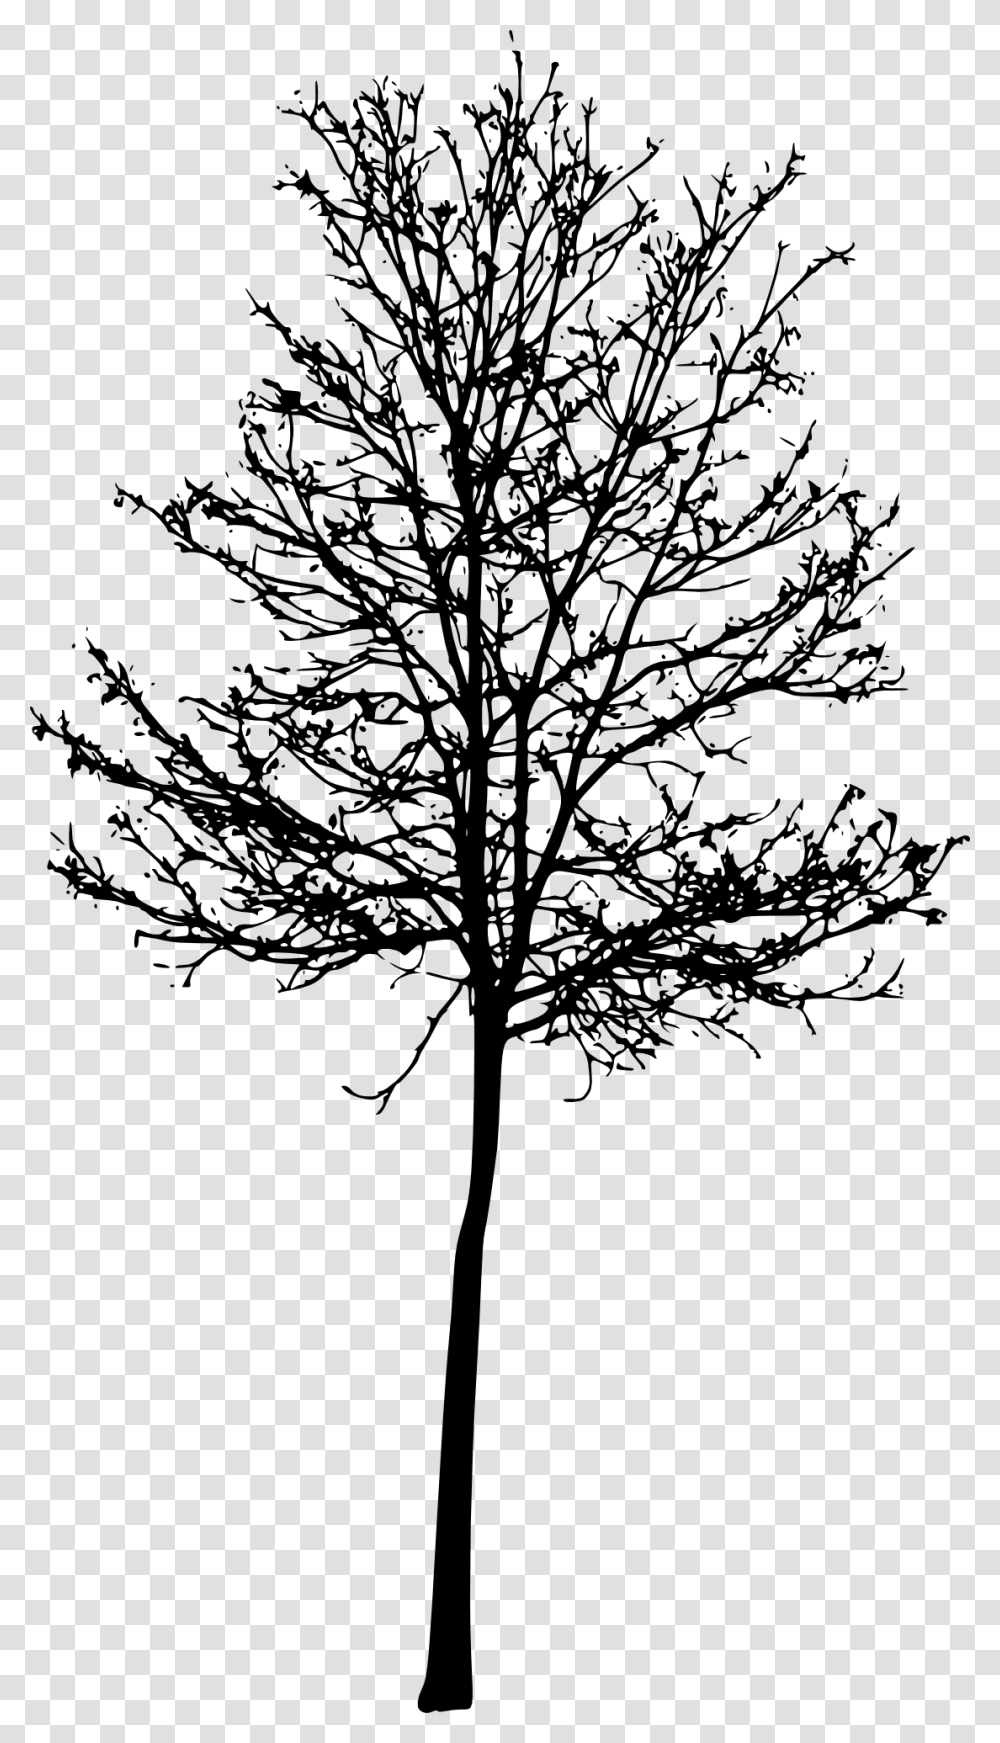 Tree Silhouette Roots Tree With Roots Silhouettes, Plant, Oak, Stencil, Leaf Transparent Png